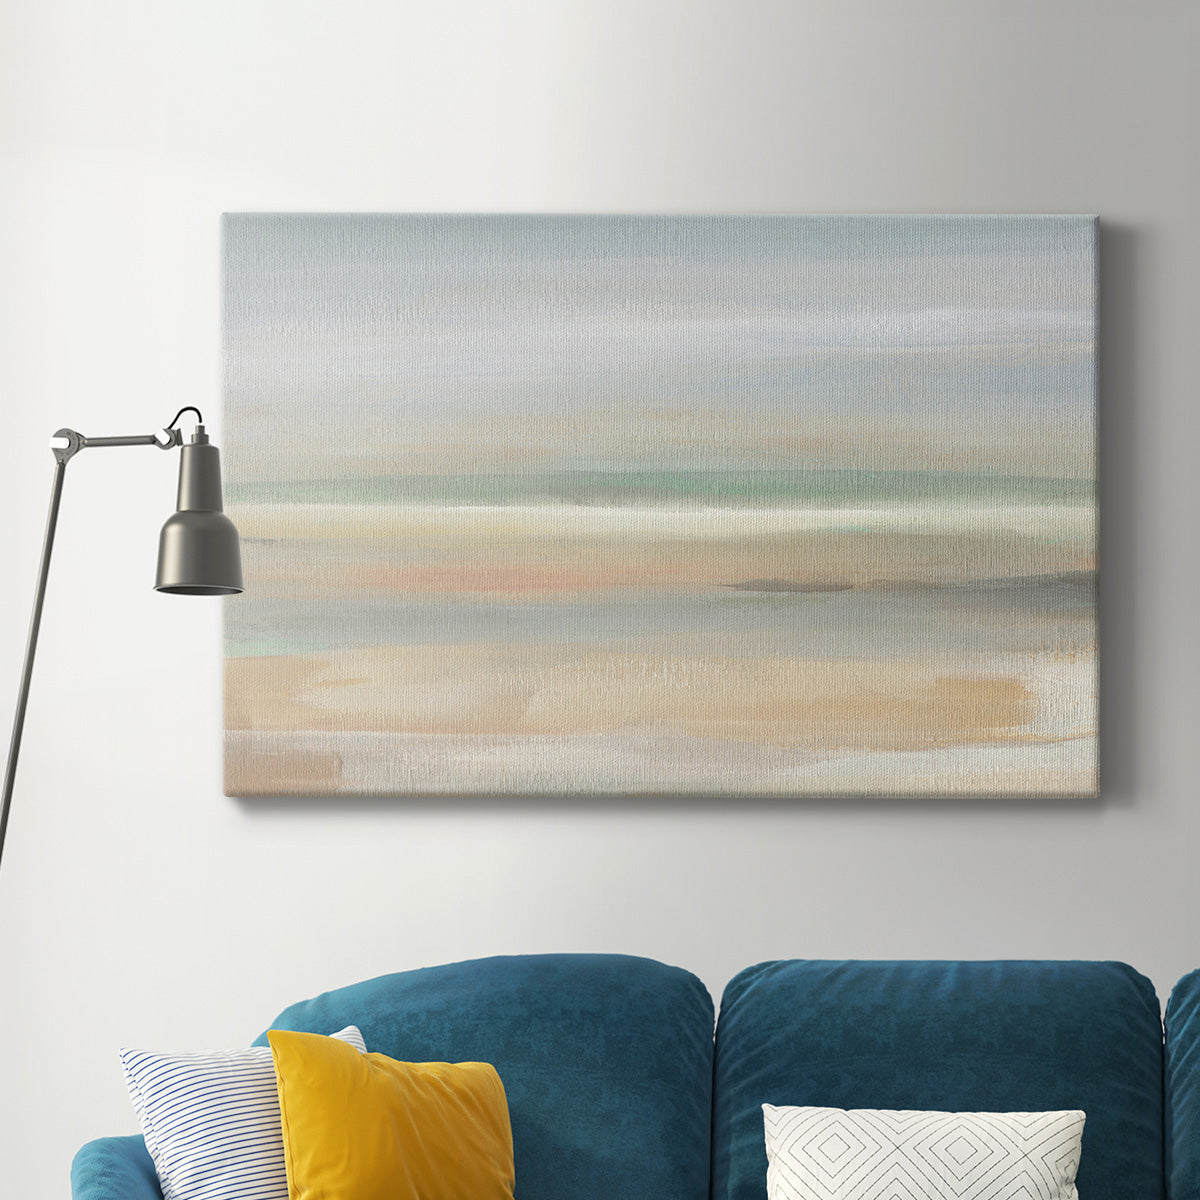 Soft Far Field Premium Gallery Wrapped Canvas - Ready to Hang